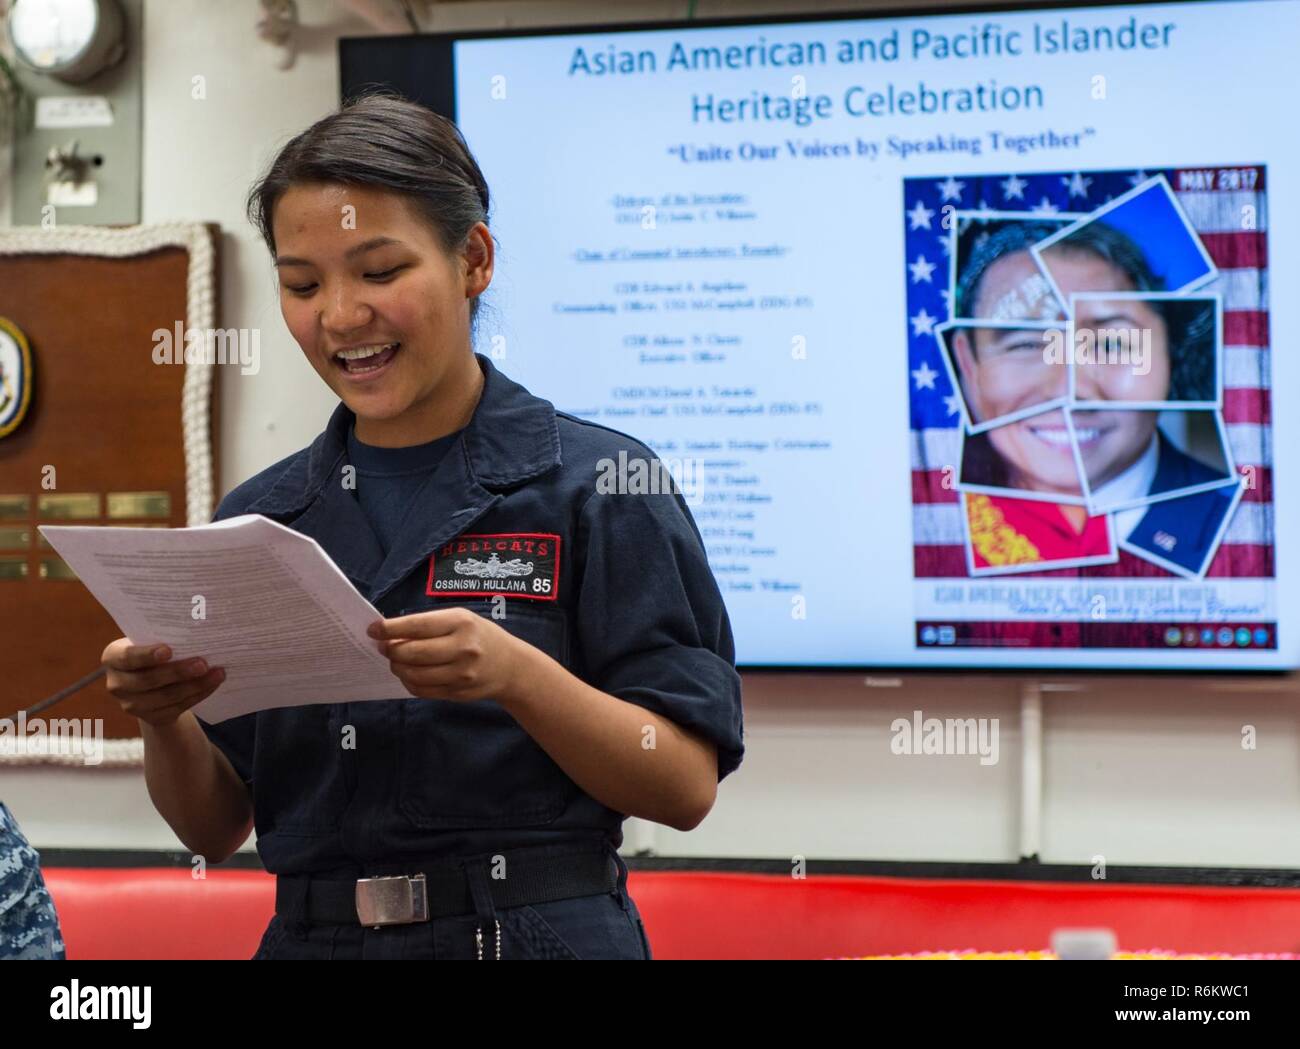 WATERS SOUTH OF JAPAN (May 21, 2017) Operations Specialist Seaman Jo Yedda Hullana, assigned to the Arleigh Burke-class guided-missile destroyer USS McCampbell (DDG 85), gives a speech during a Asian American and Pacific Islander Heritage Month celebration. McCampbell is on patrol in the U.S. 7th Fleet area of operations in support of security and stability in the Indo-Asia-Pacific region. Stock Photo